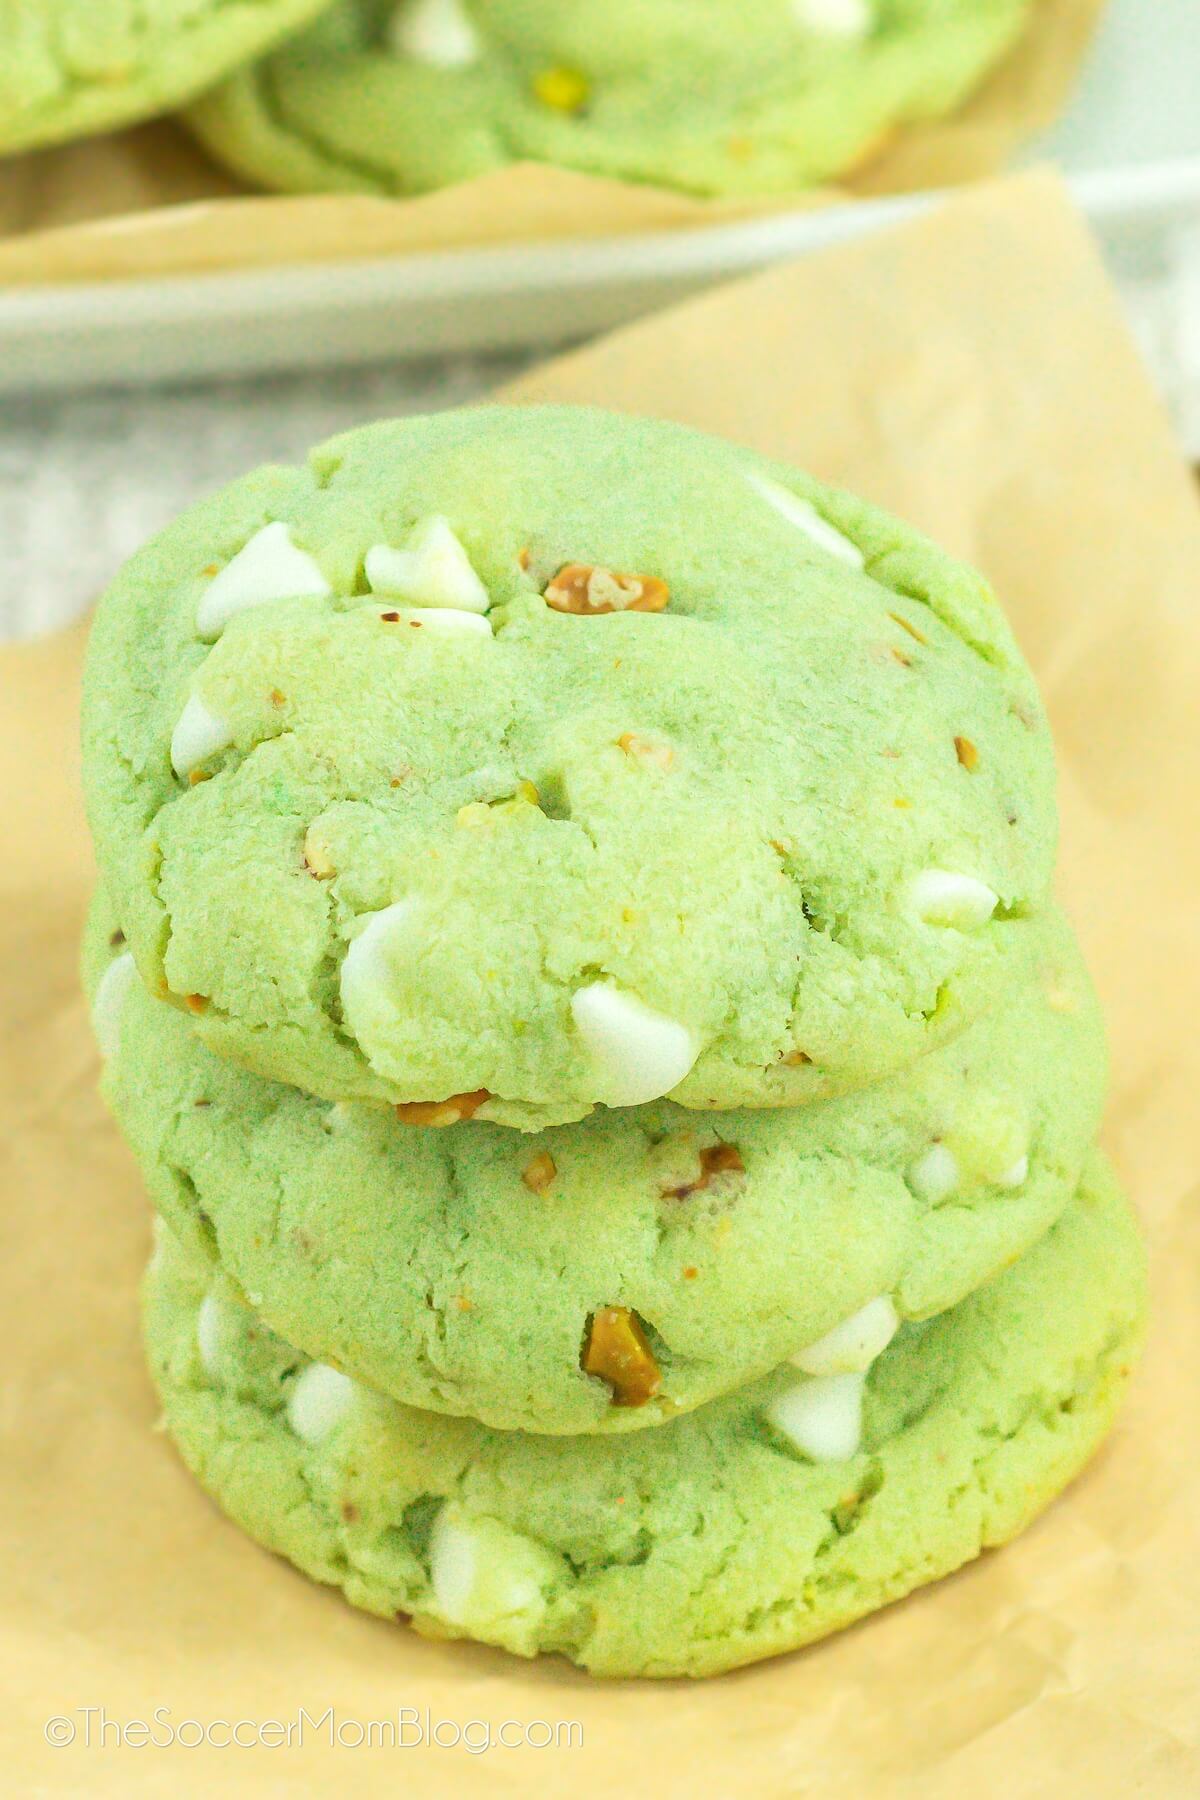 stack of 3 green Pistachio Pudding Cookies with nuts and white chocolate chips.